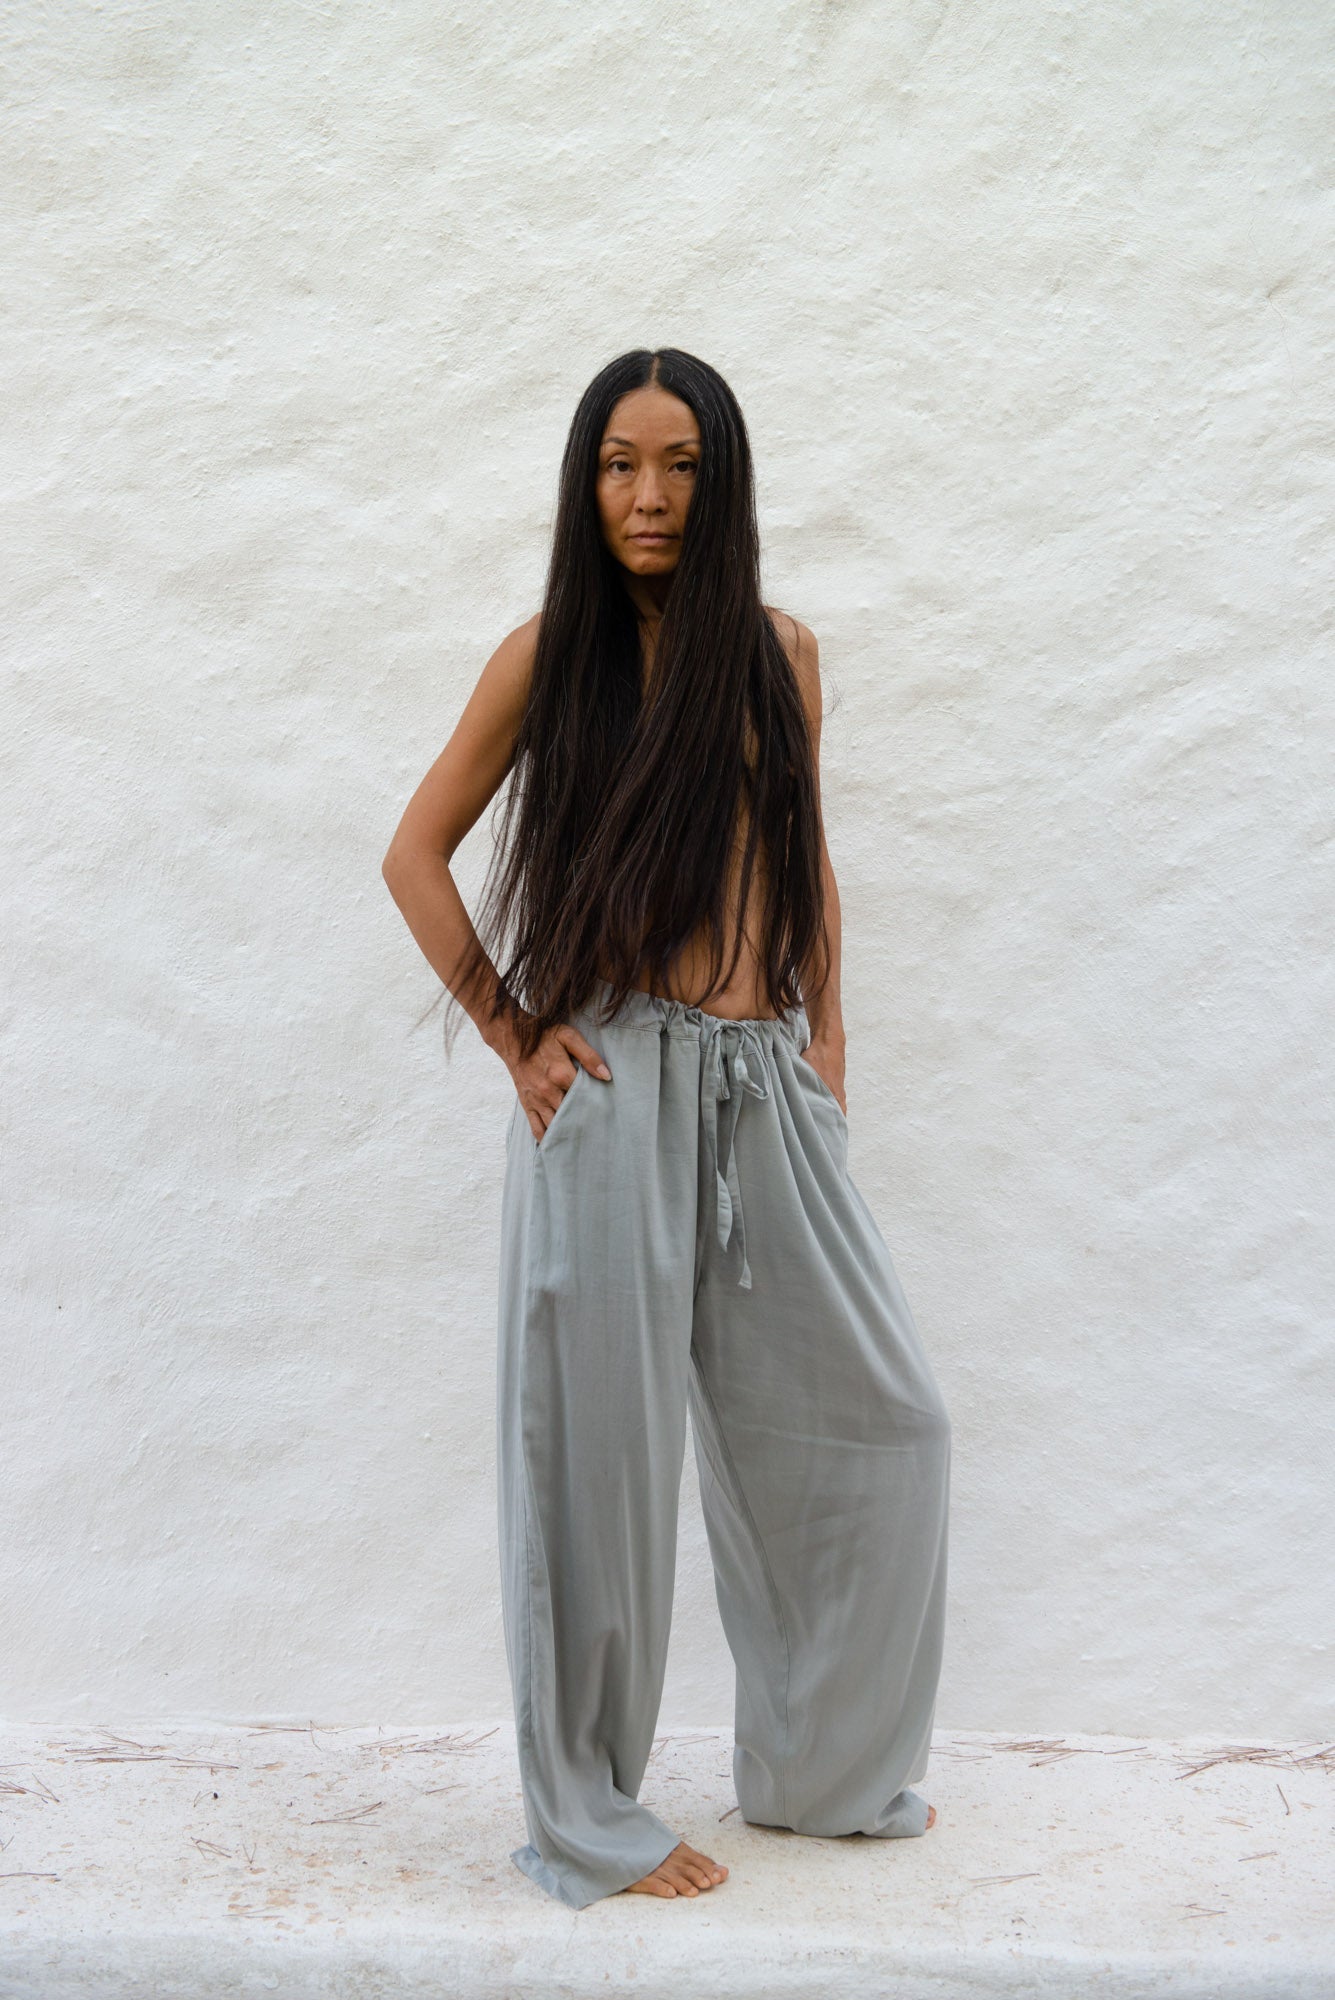 Can Pep Rey wide pants Andrea sun - wrought iron